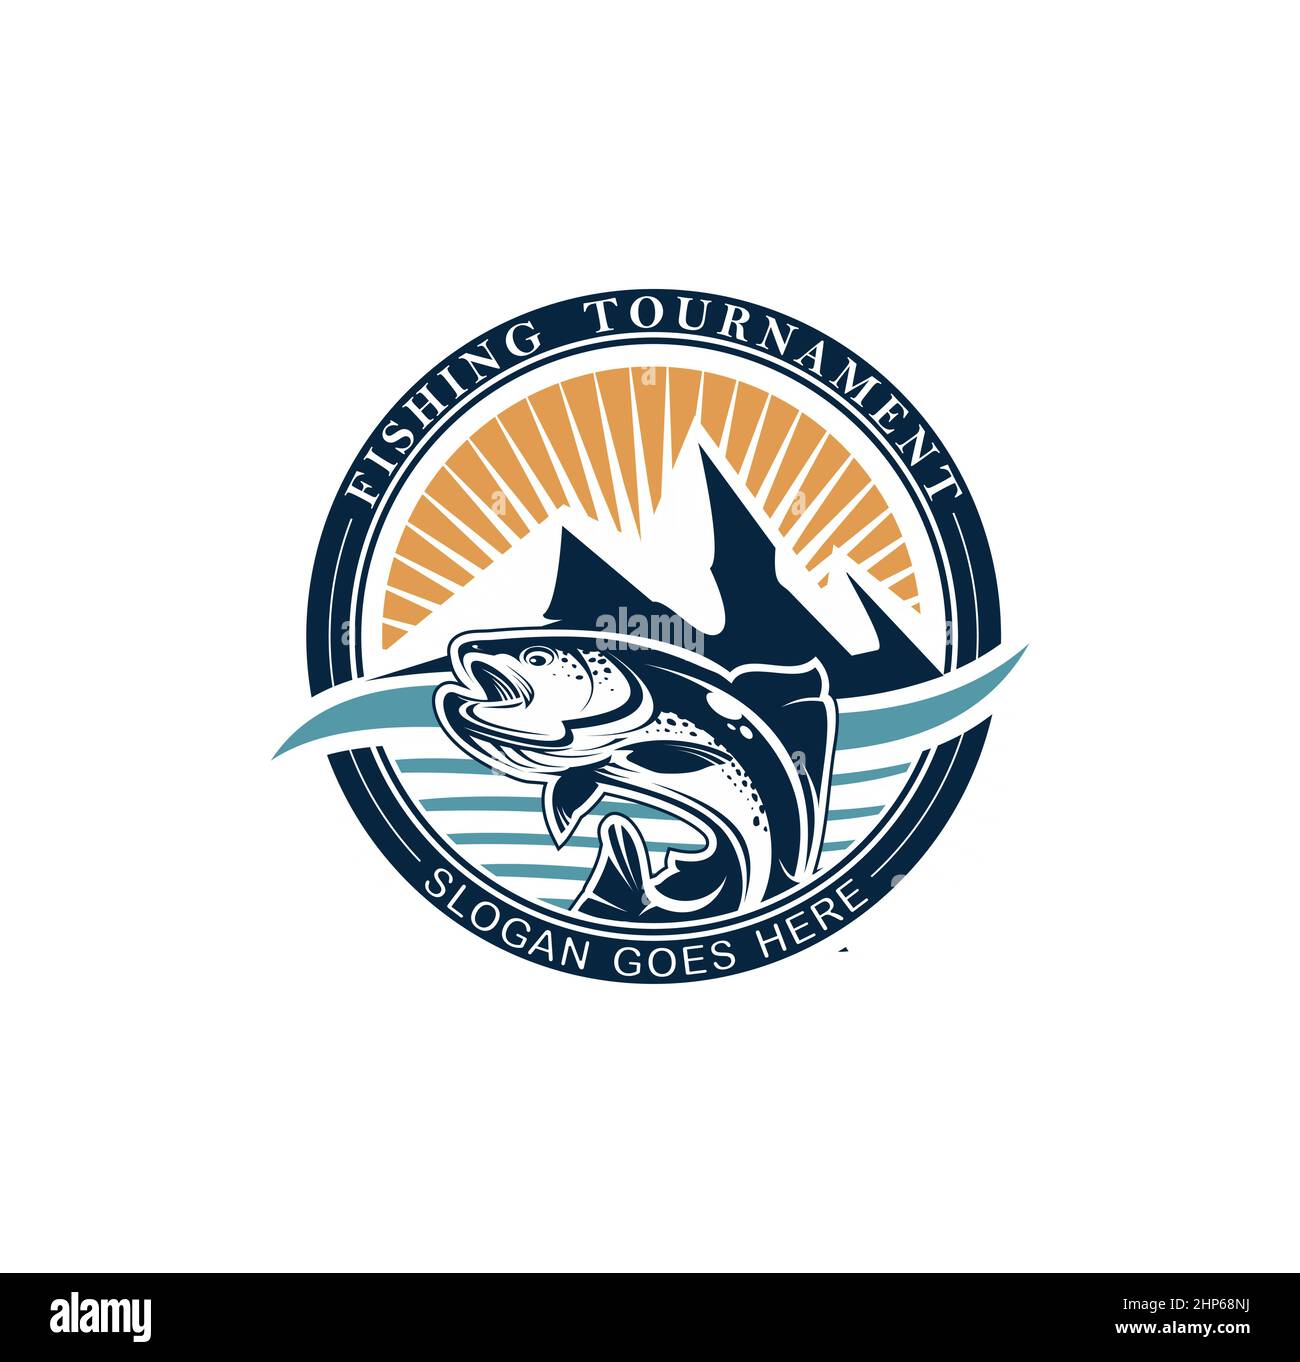 Vintage fishing logo Stock Vector Images - Page 2 - Alamy